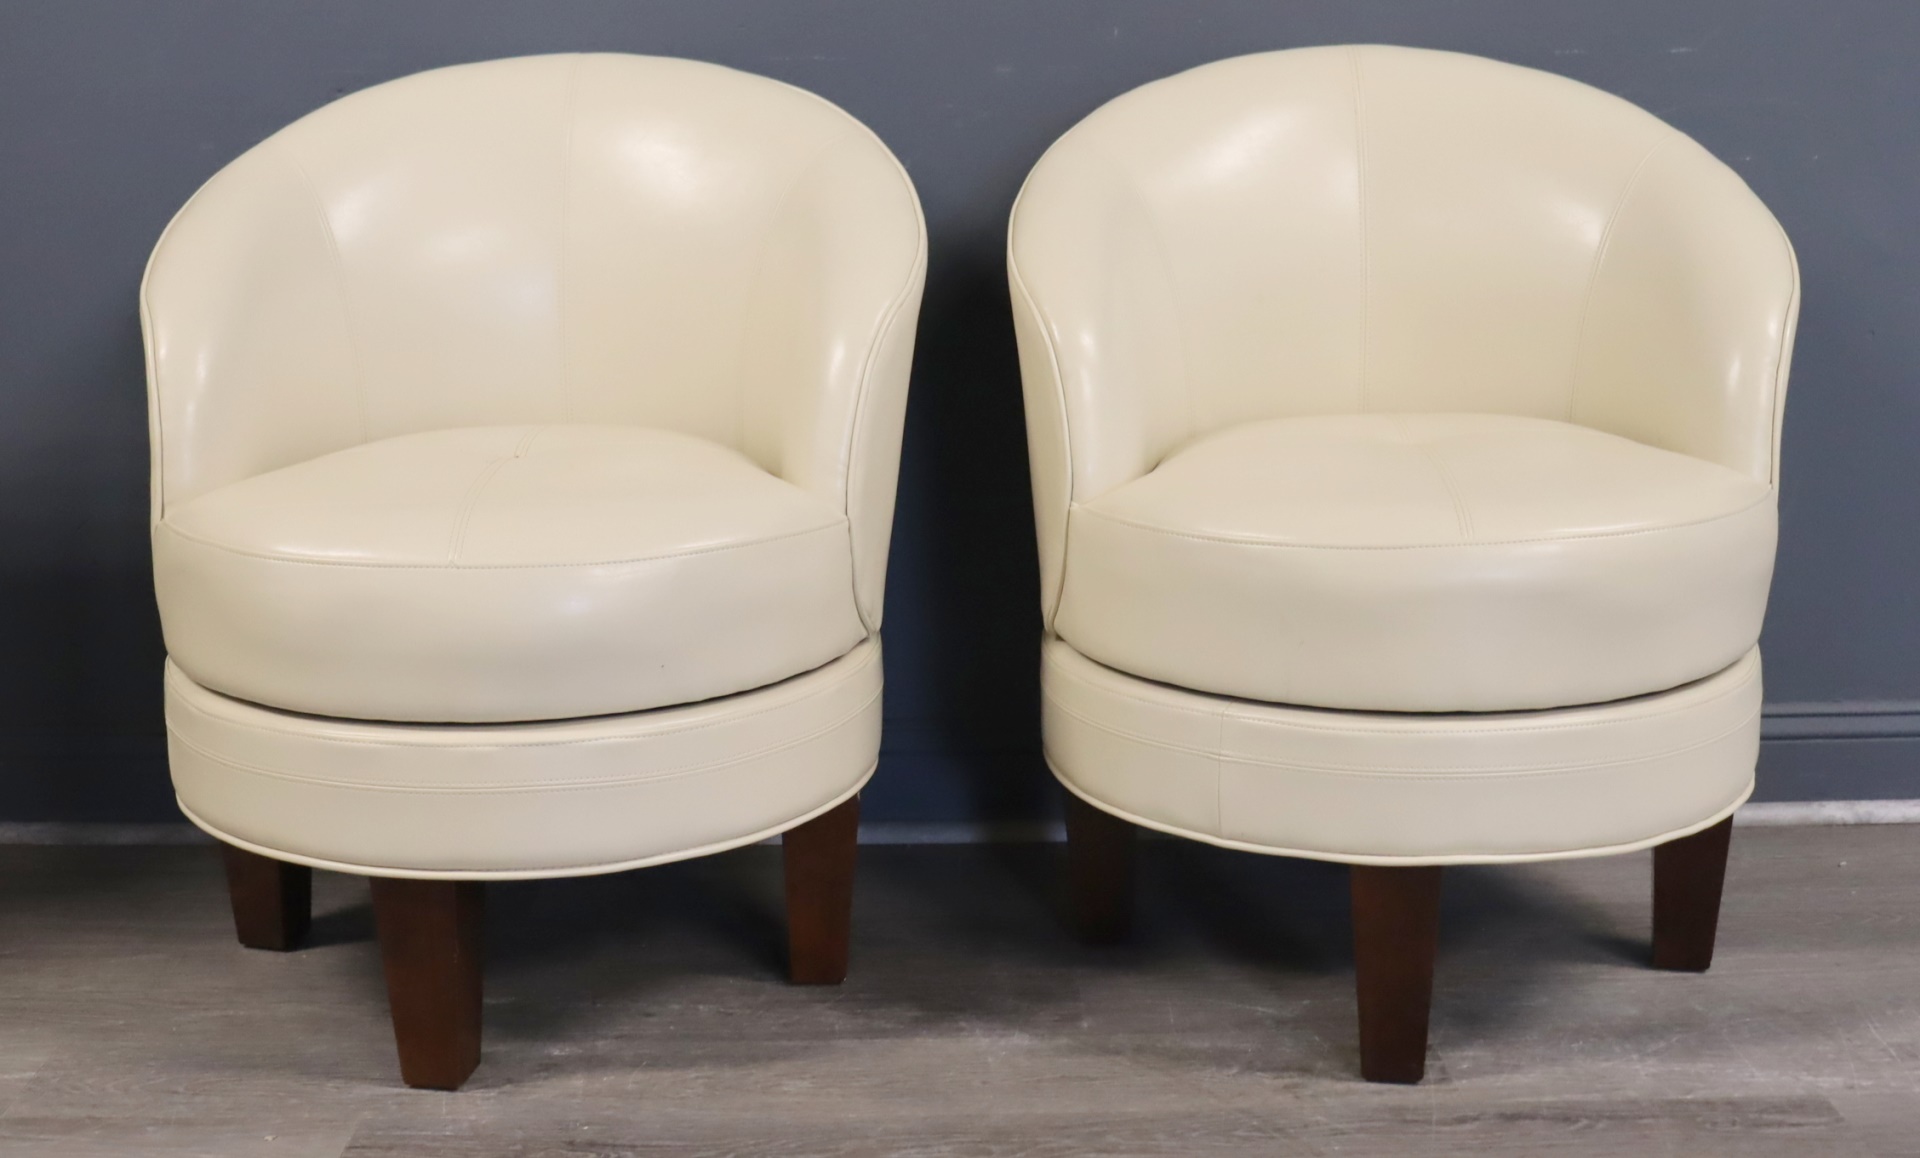 A MODERN PAIR OF LEATHER UPHOLSTERED 3b77fd